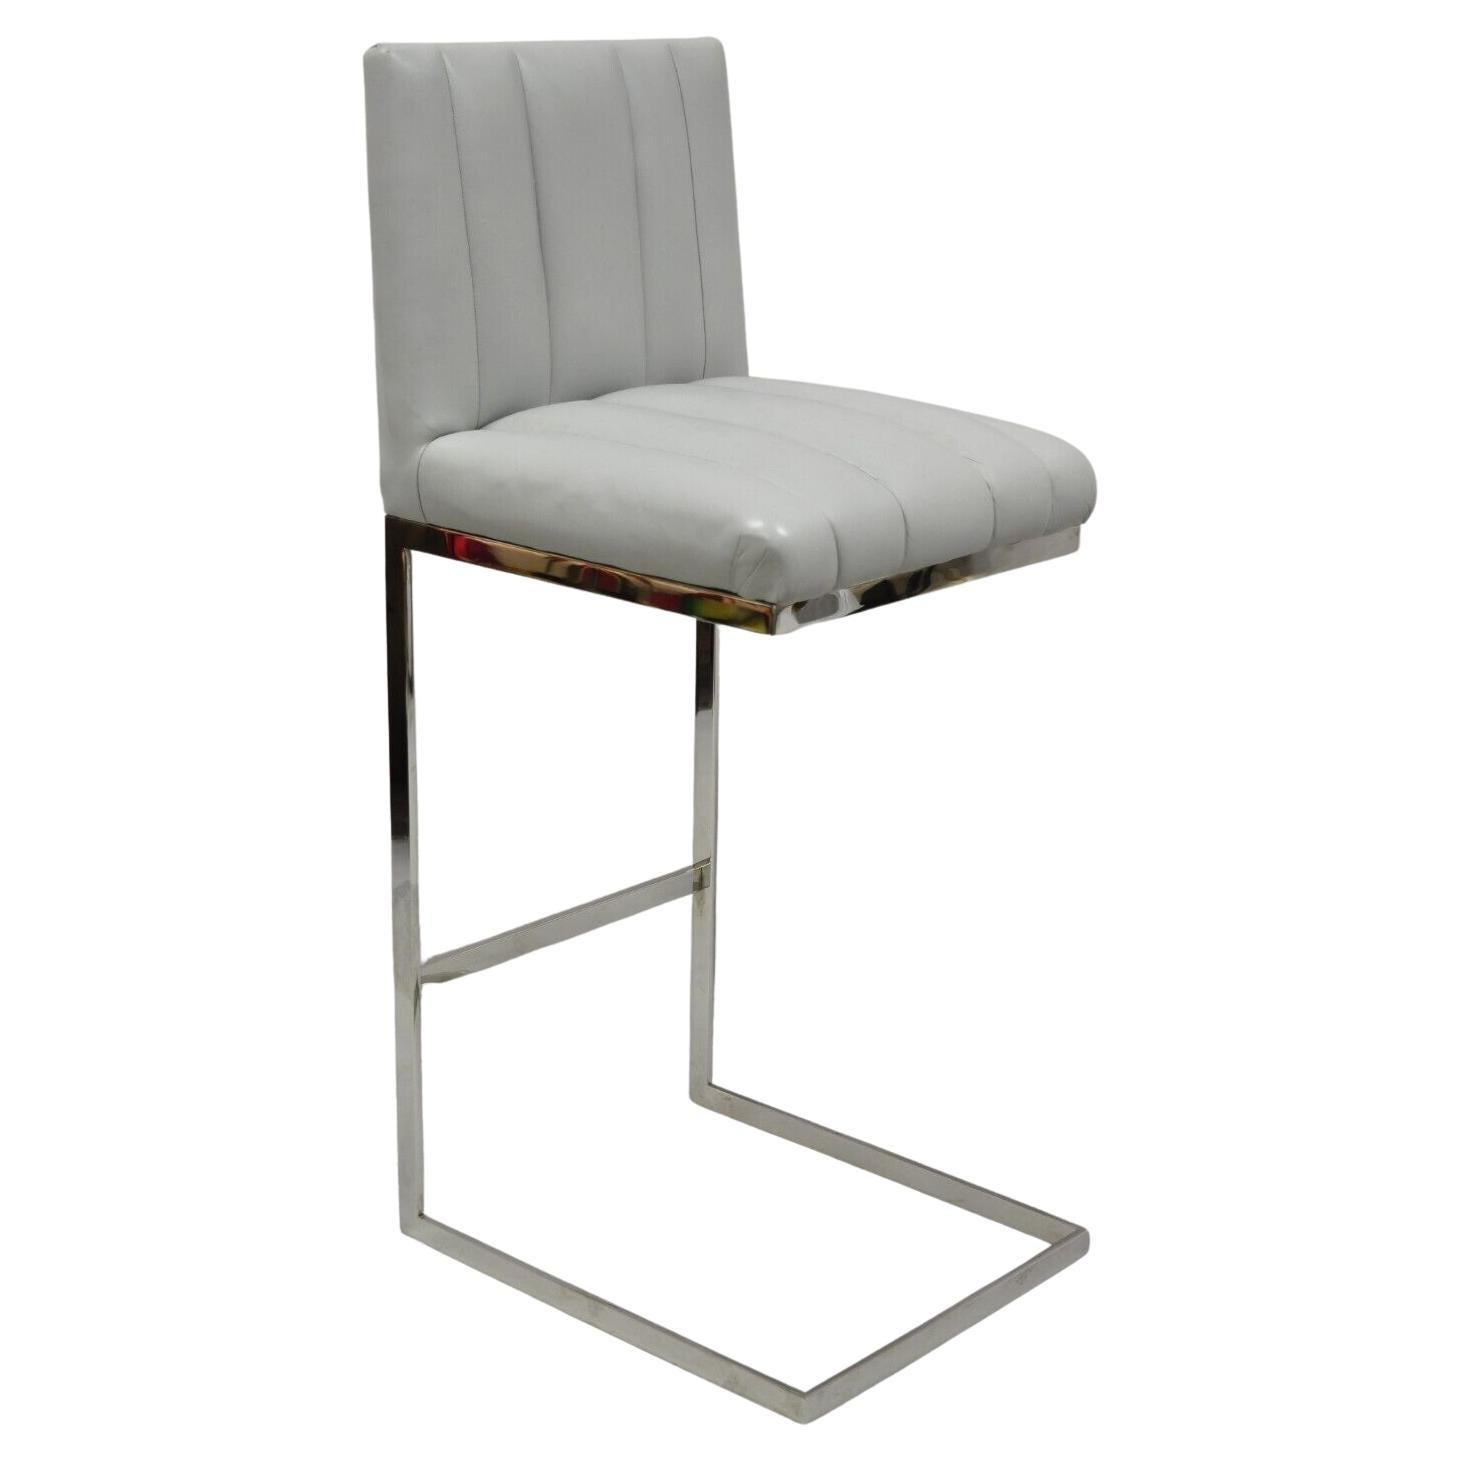 Modern Polished Chrome Gray Channel Leather Upholstered Bar Stool Chair For Sale